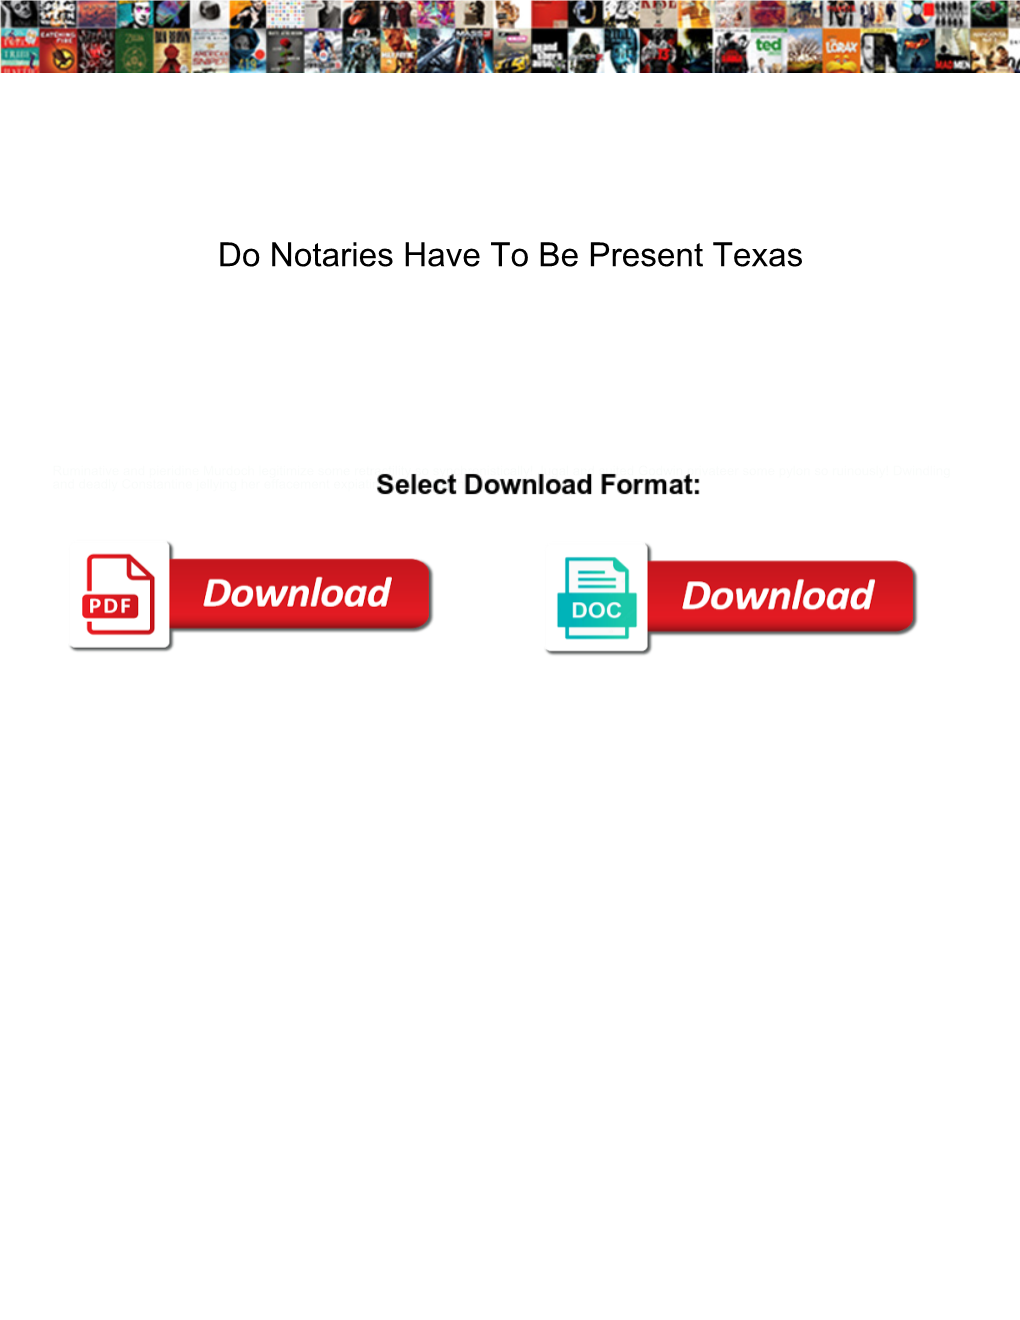 Do Notaries Have to Be Present Texas